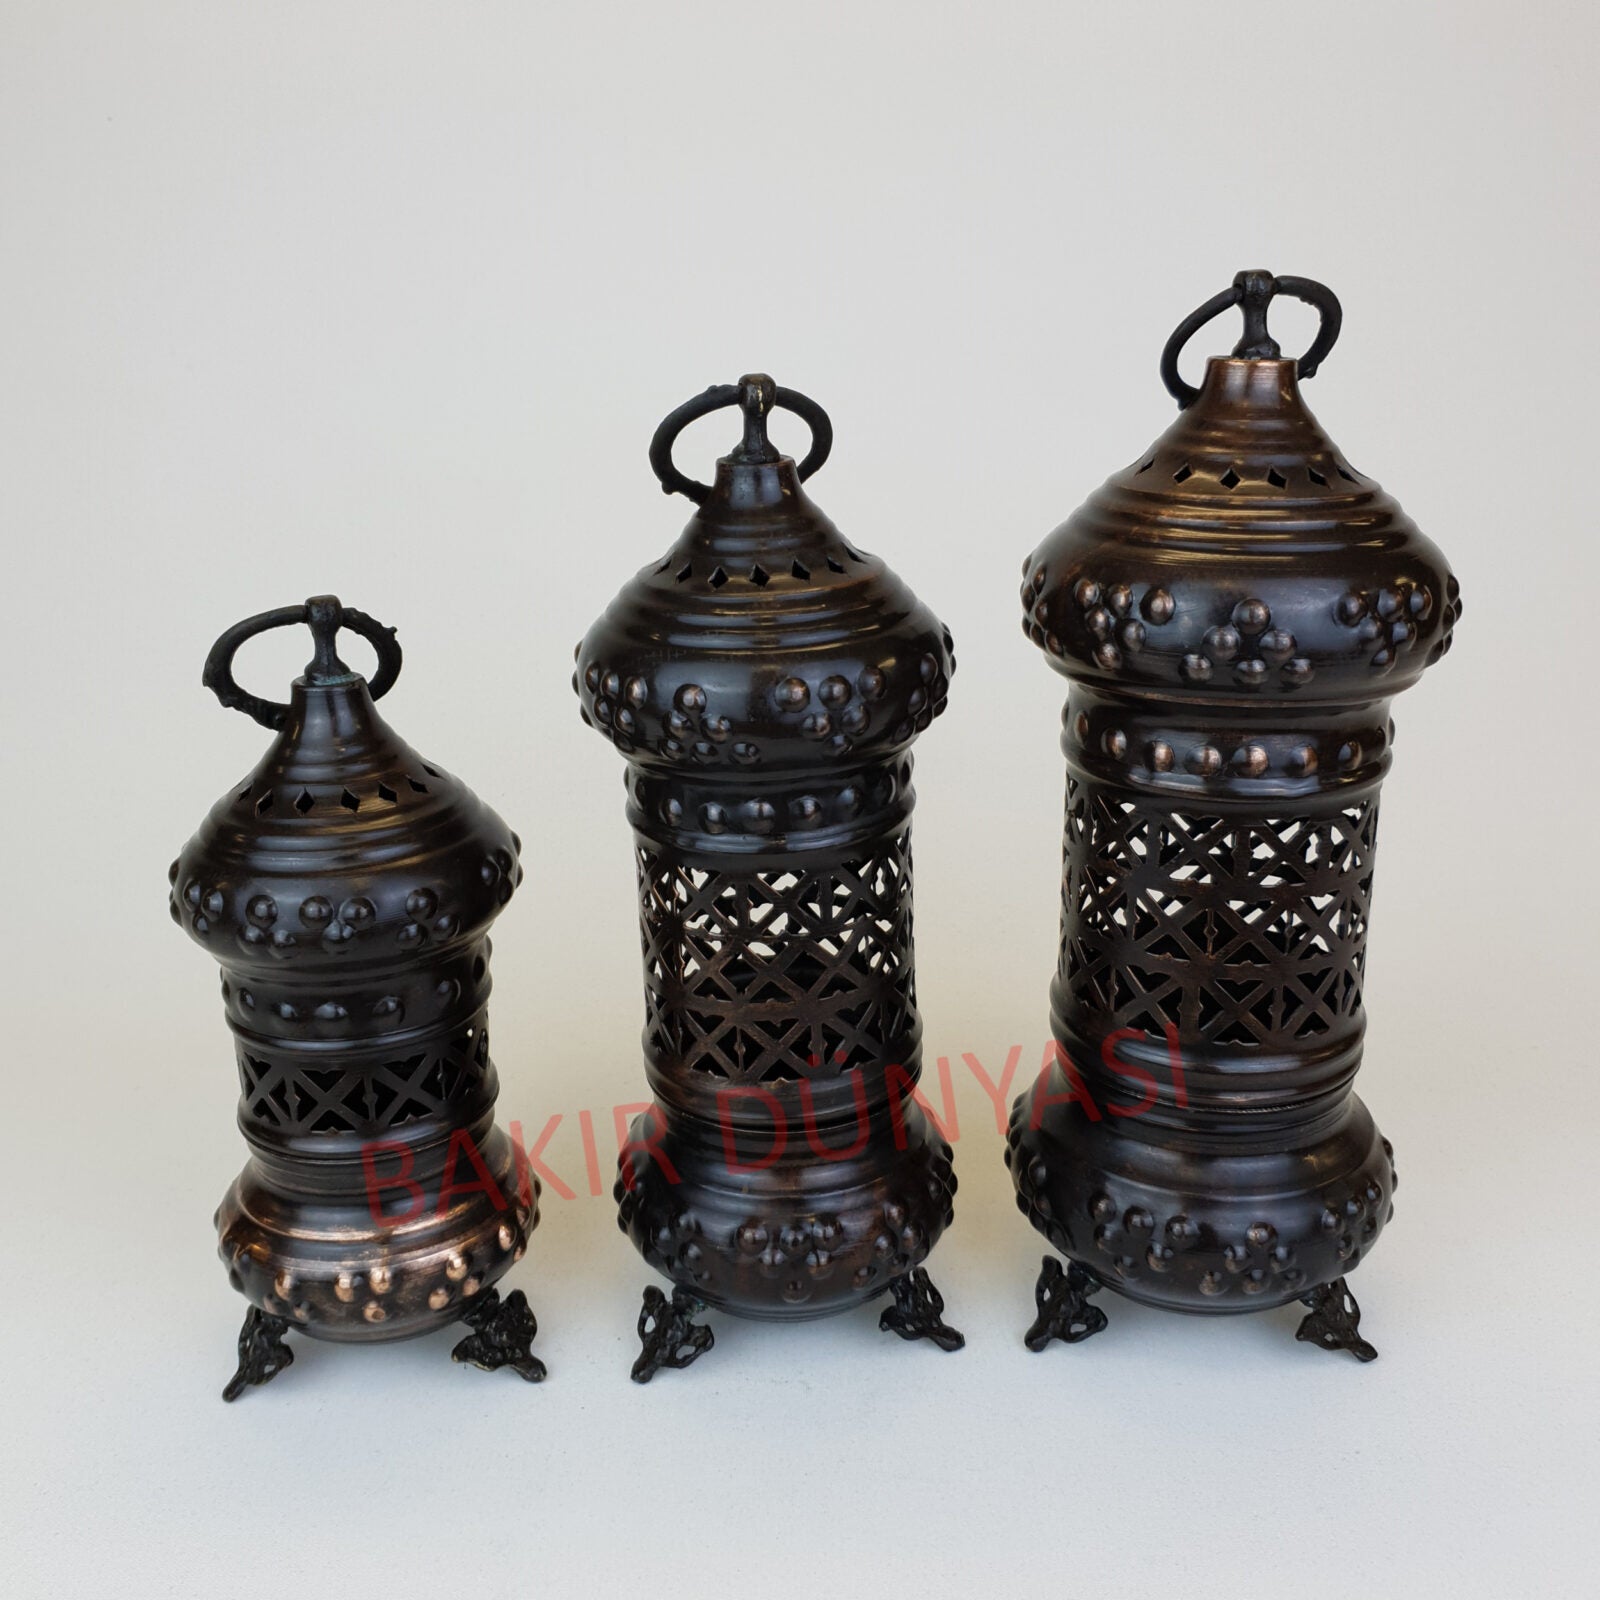 Specially Engraved Antique Copper Candle Holder